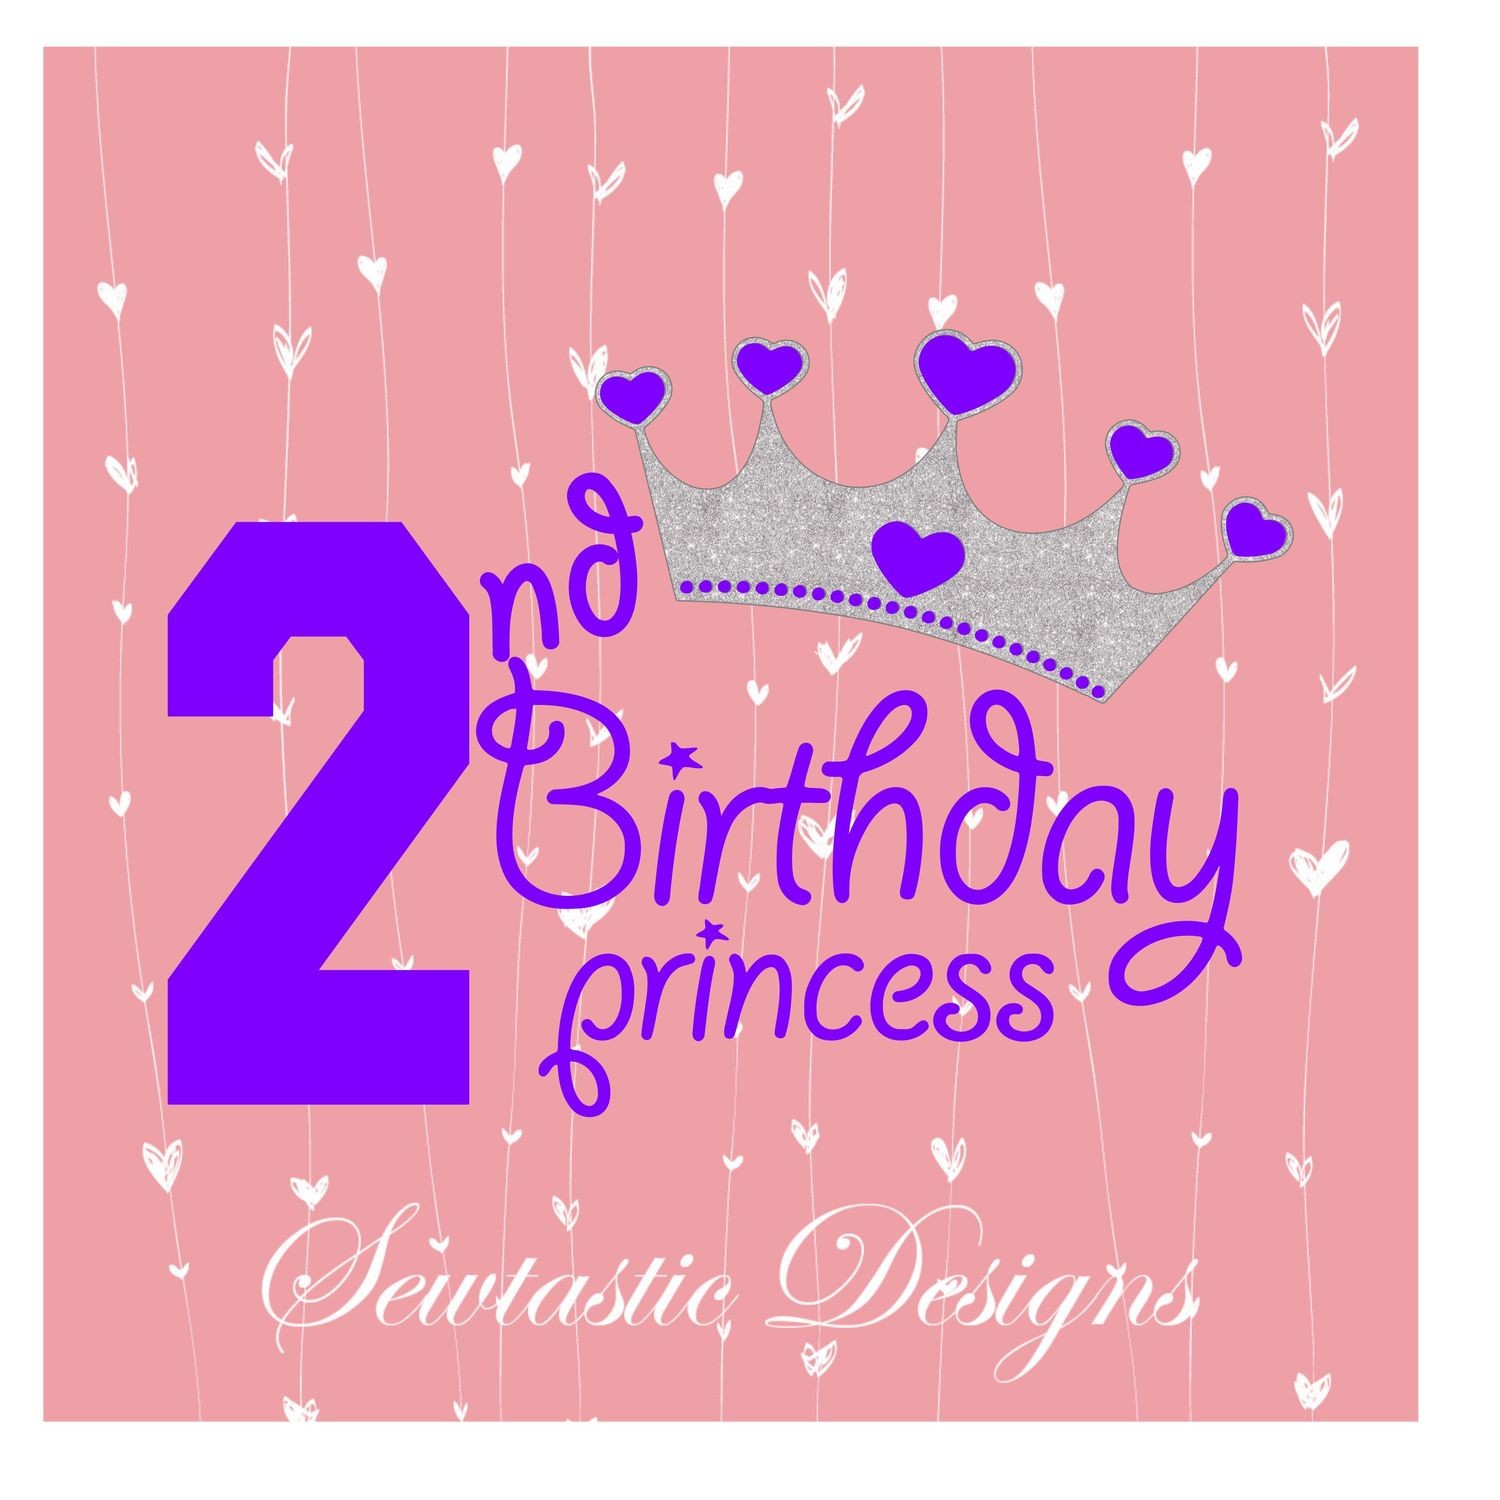 Download 2nd Birthday Princess Svg Second Birthday Svg Birthday Princess Svg Princess Svg Cut File Iron On Decal Cricut Silhouette Scanncut Many More